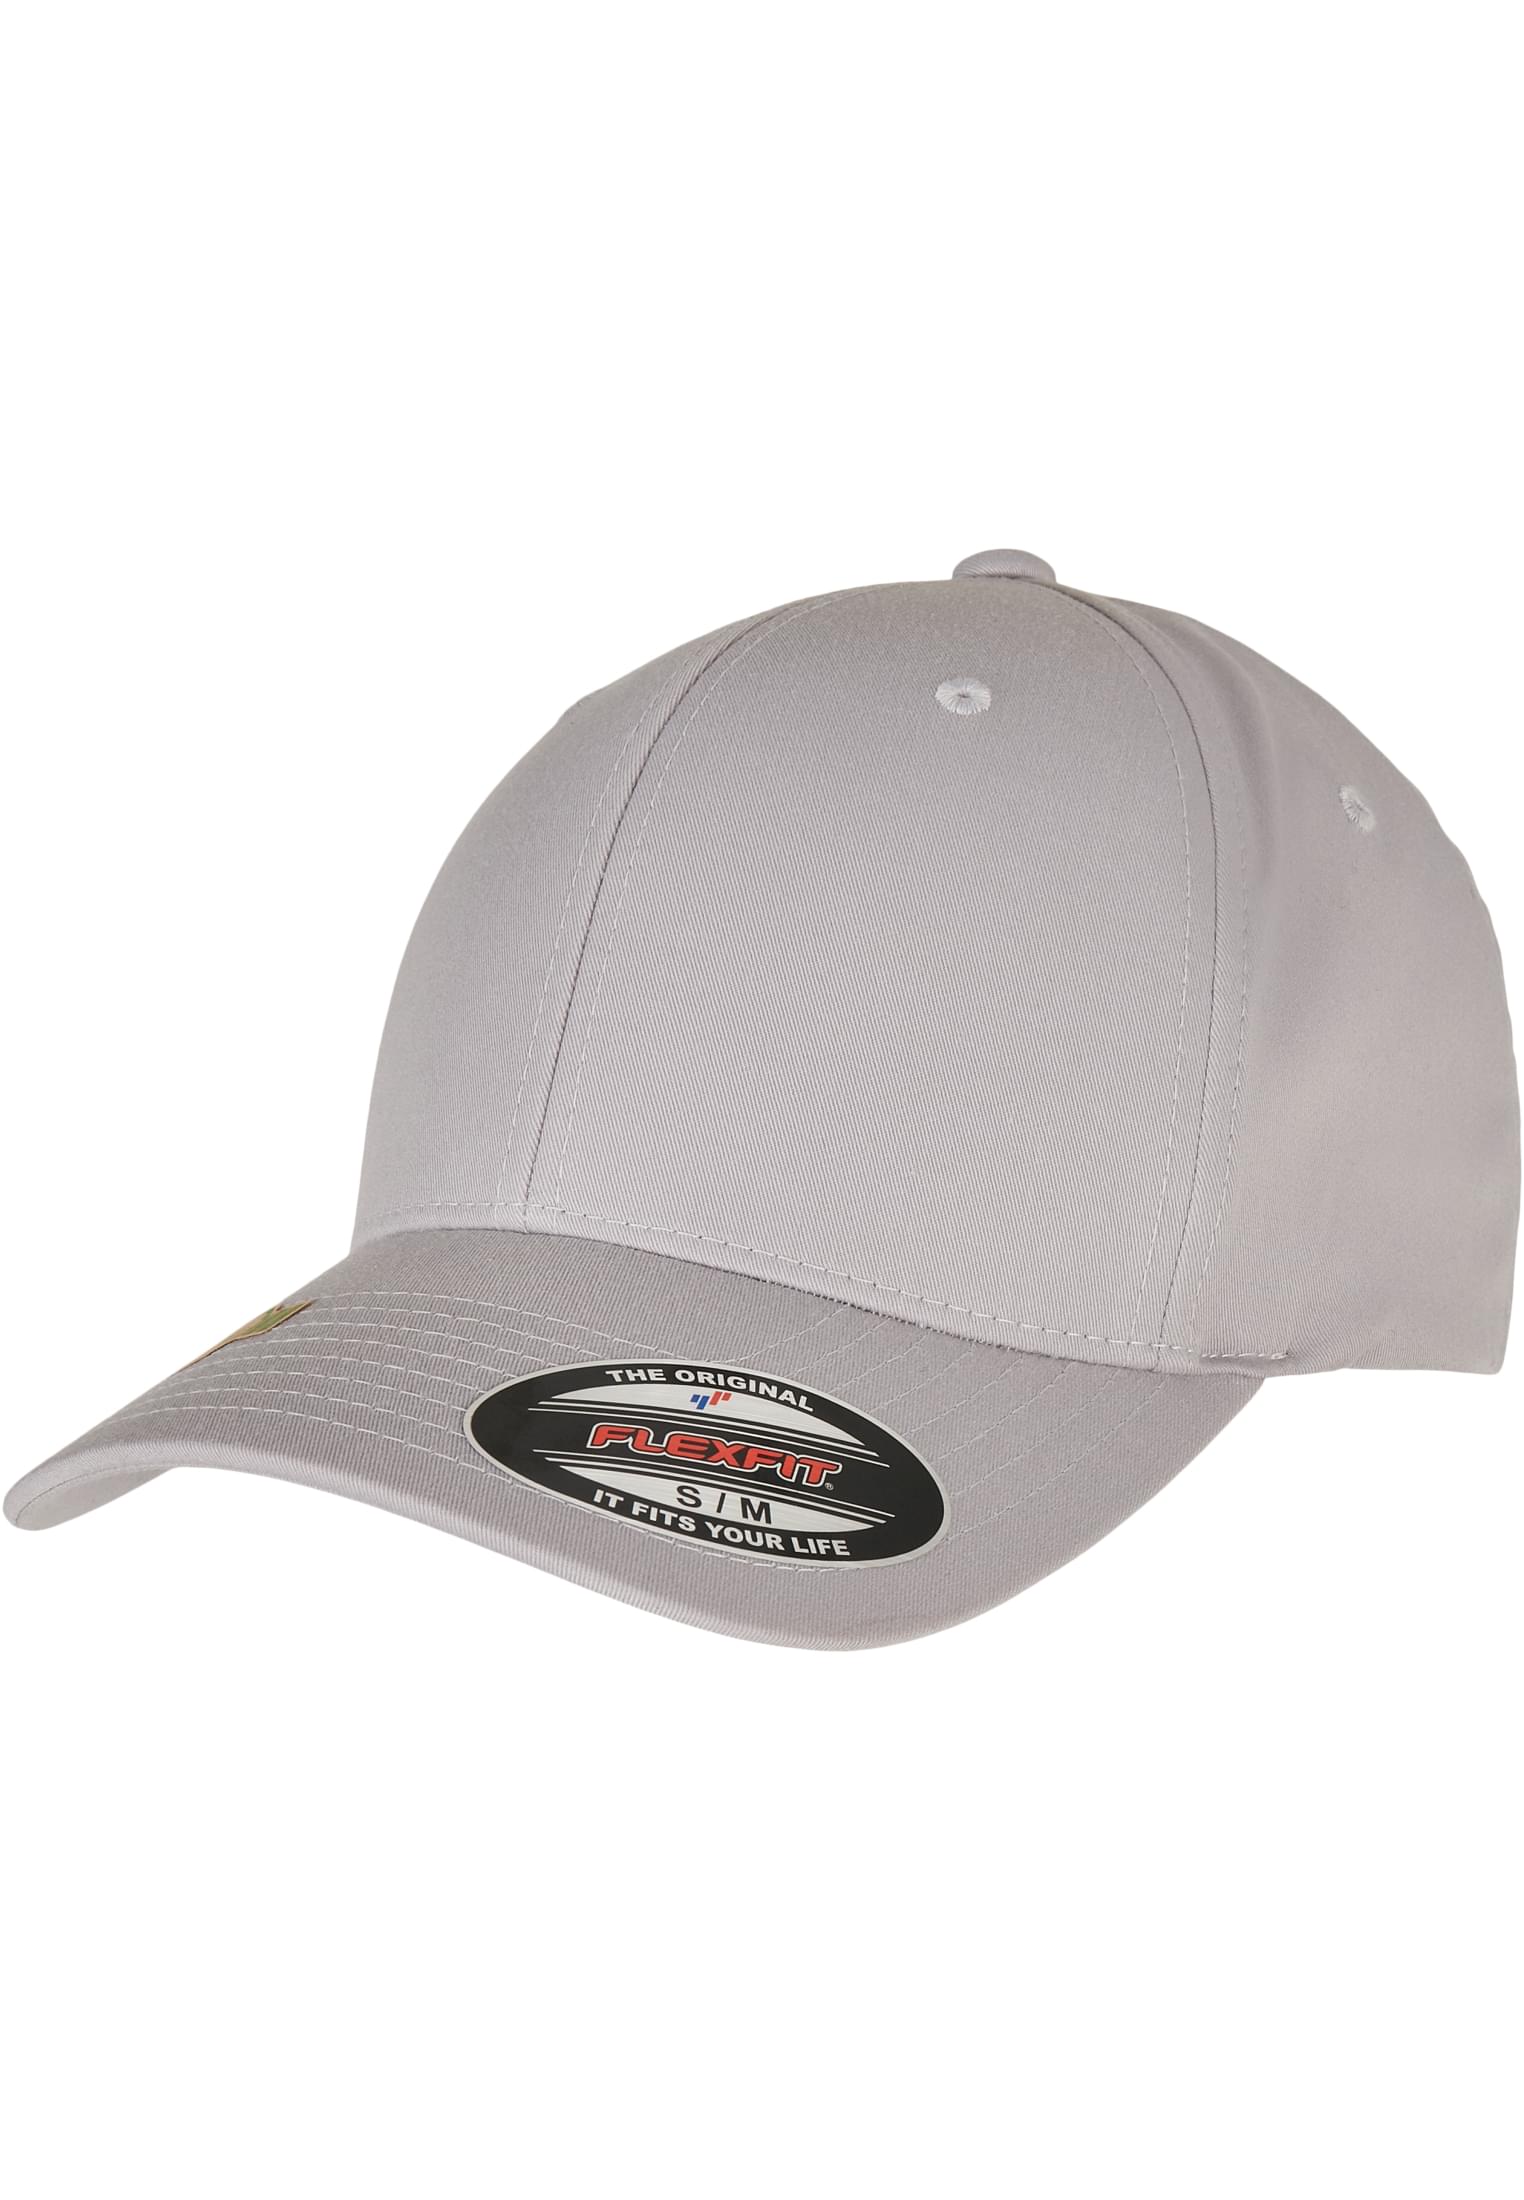 Recycled Polyester Cap-6277RP Flexfit